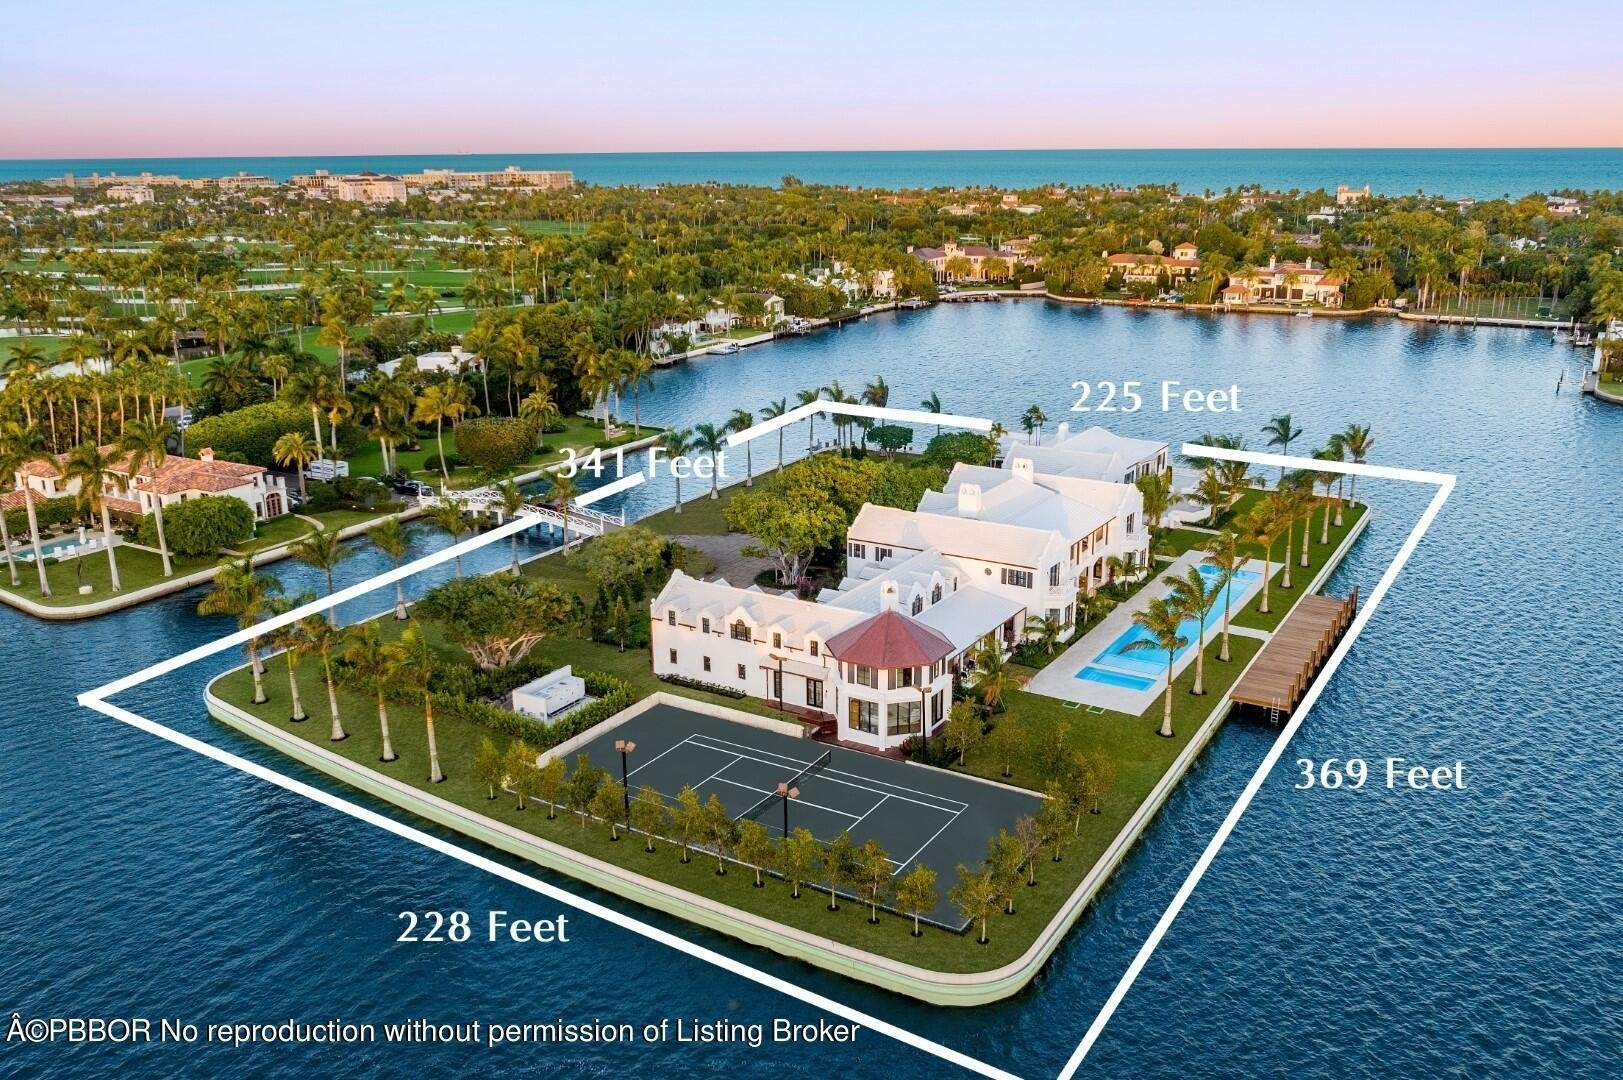 Single Family Home for Sale at Palm Beach, FL 33480